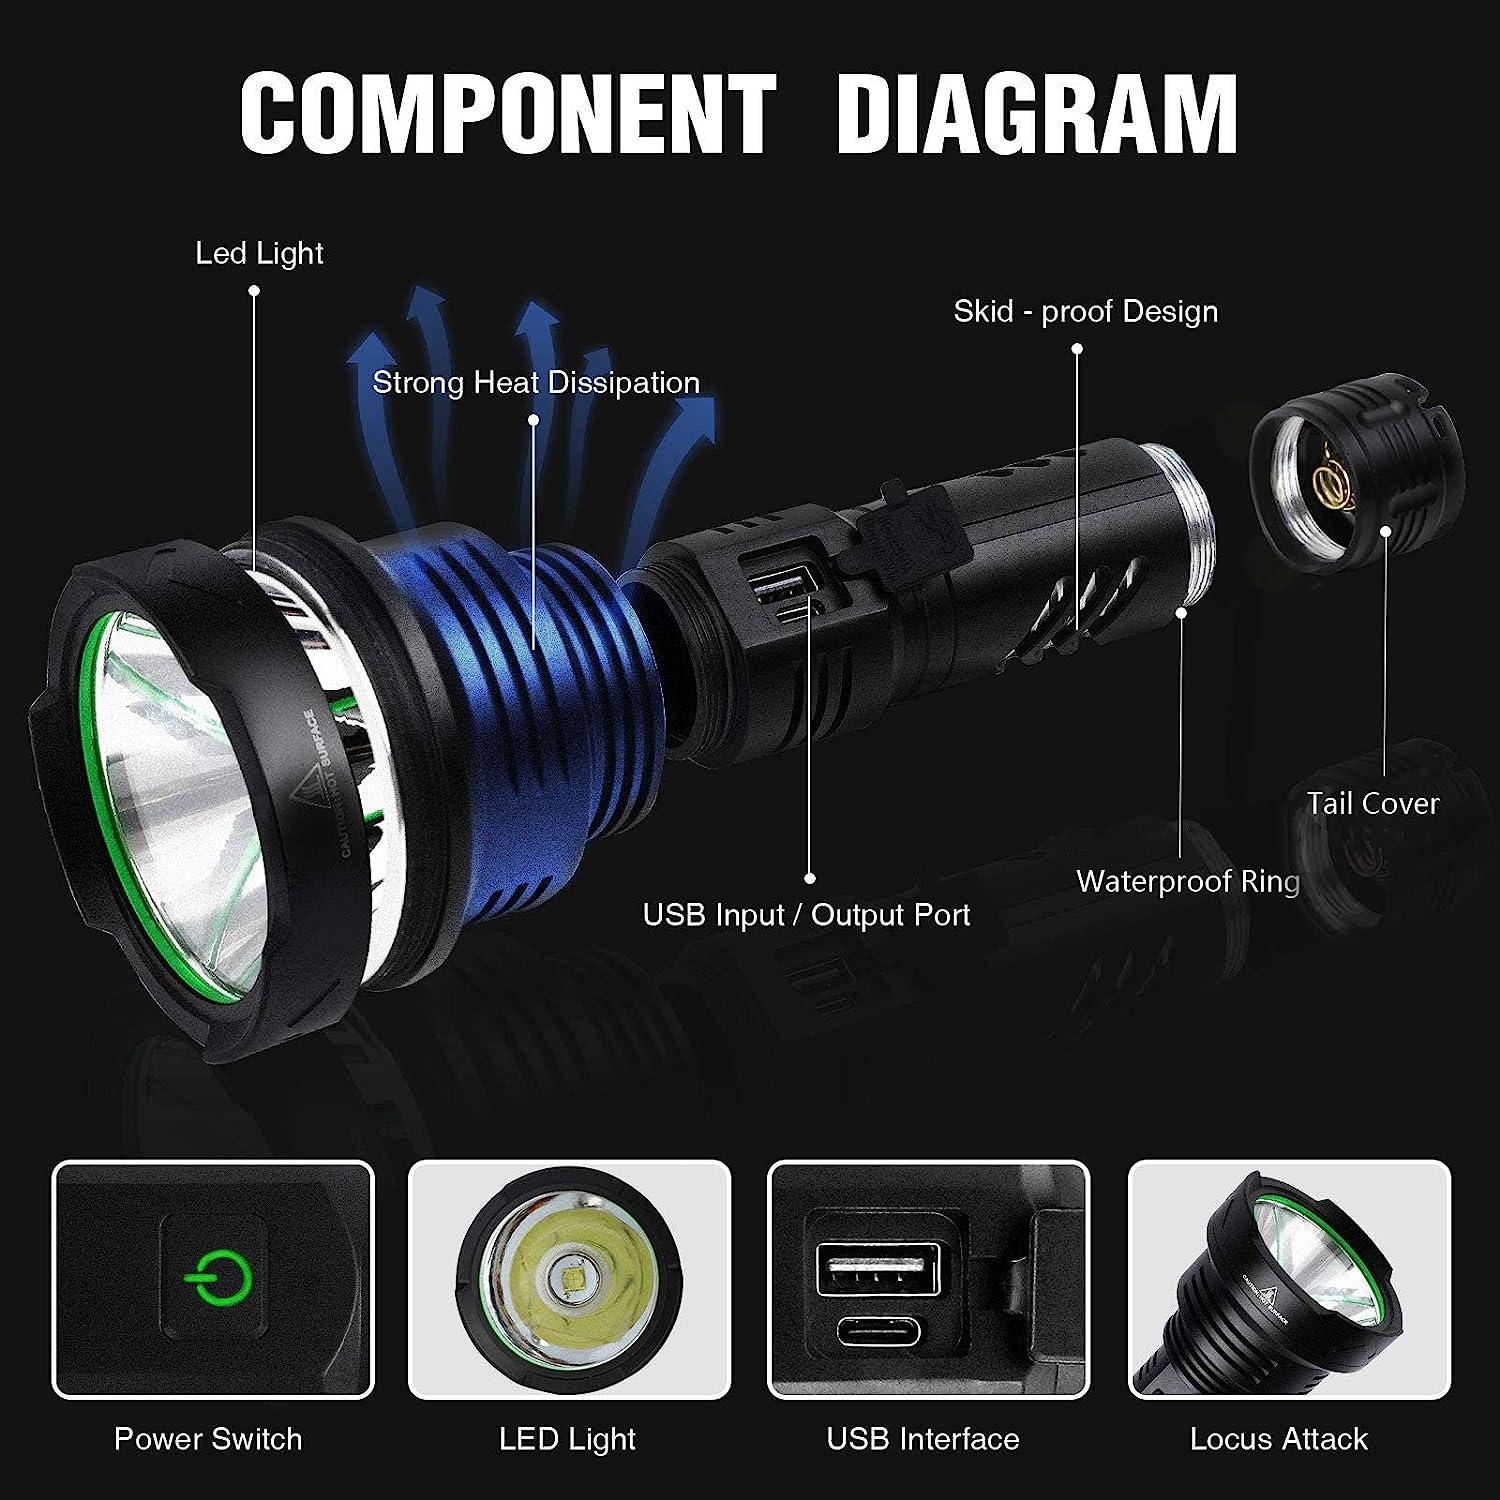 Super-bright Flashlight LED P70 Tactical Torch USB Rechargeable